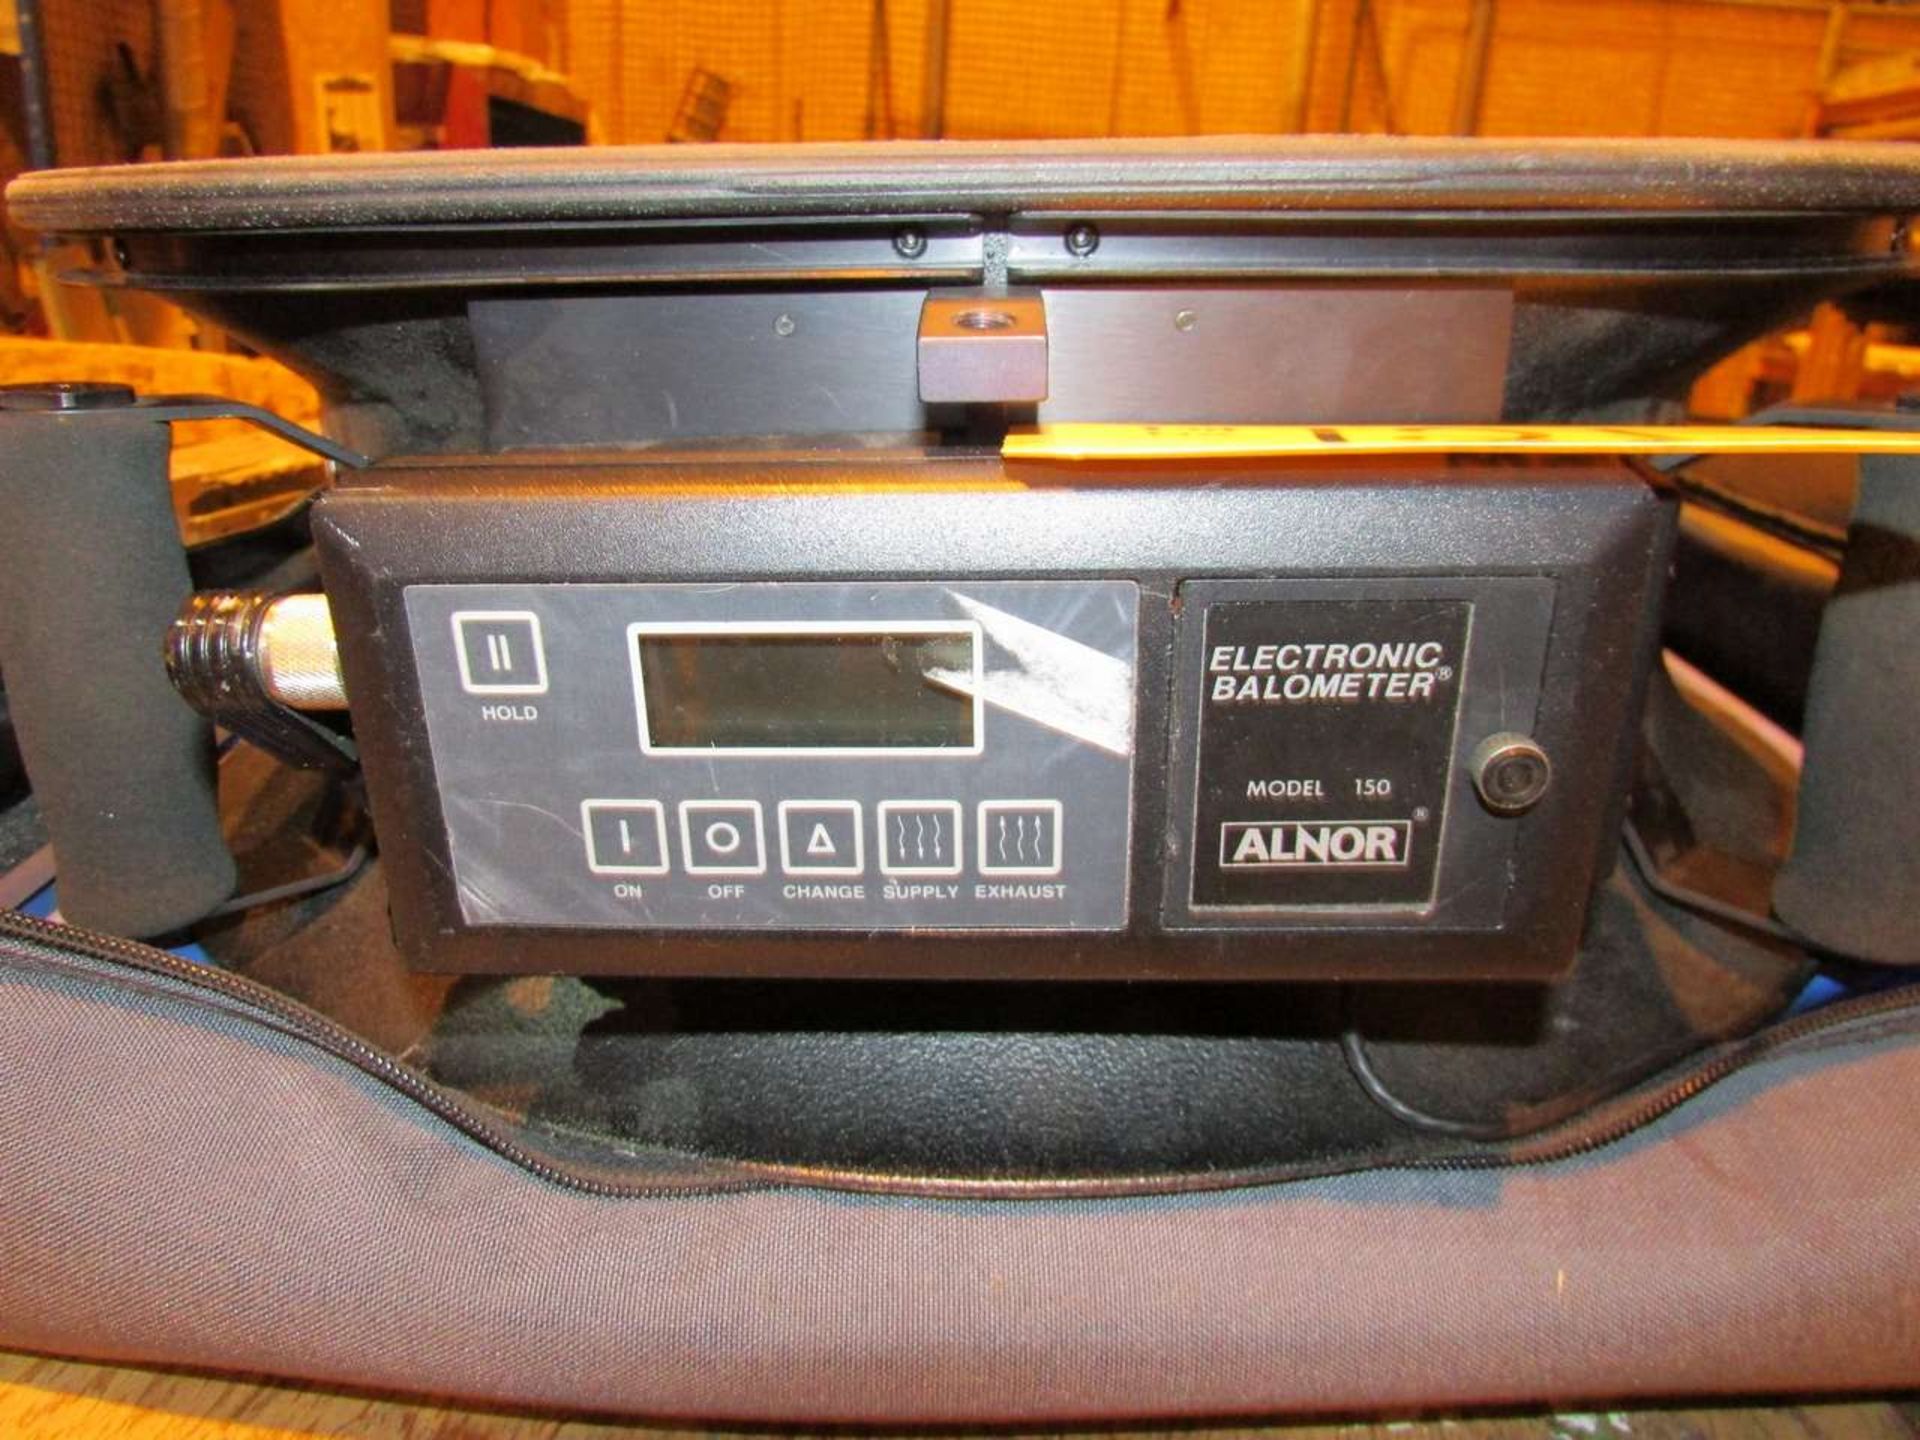 Alnor 150 Electronic Balometer - Image 2 of 2